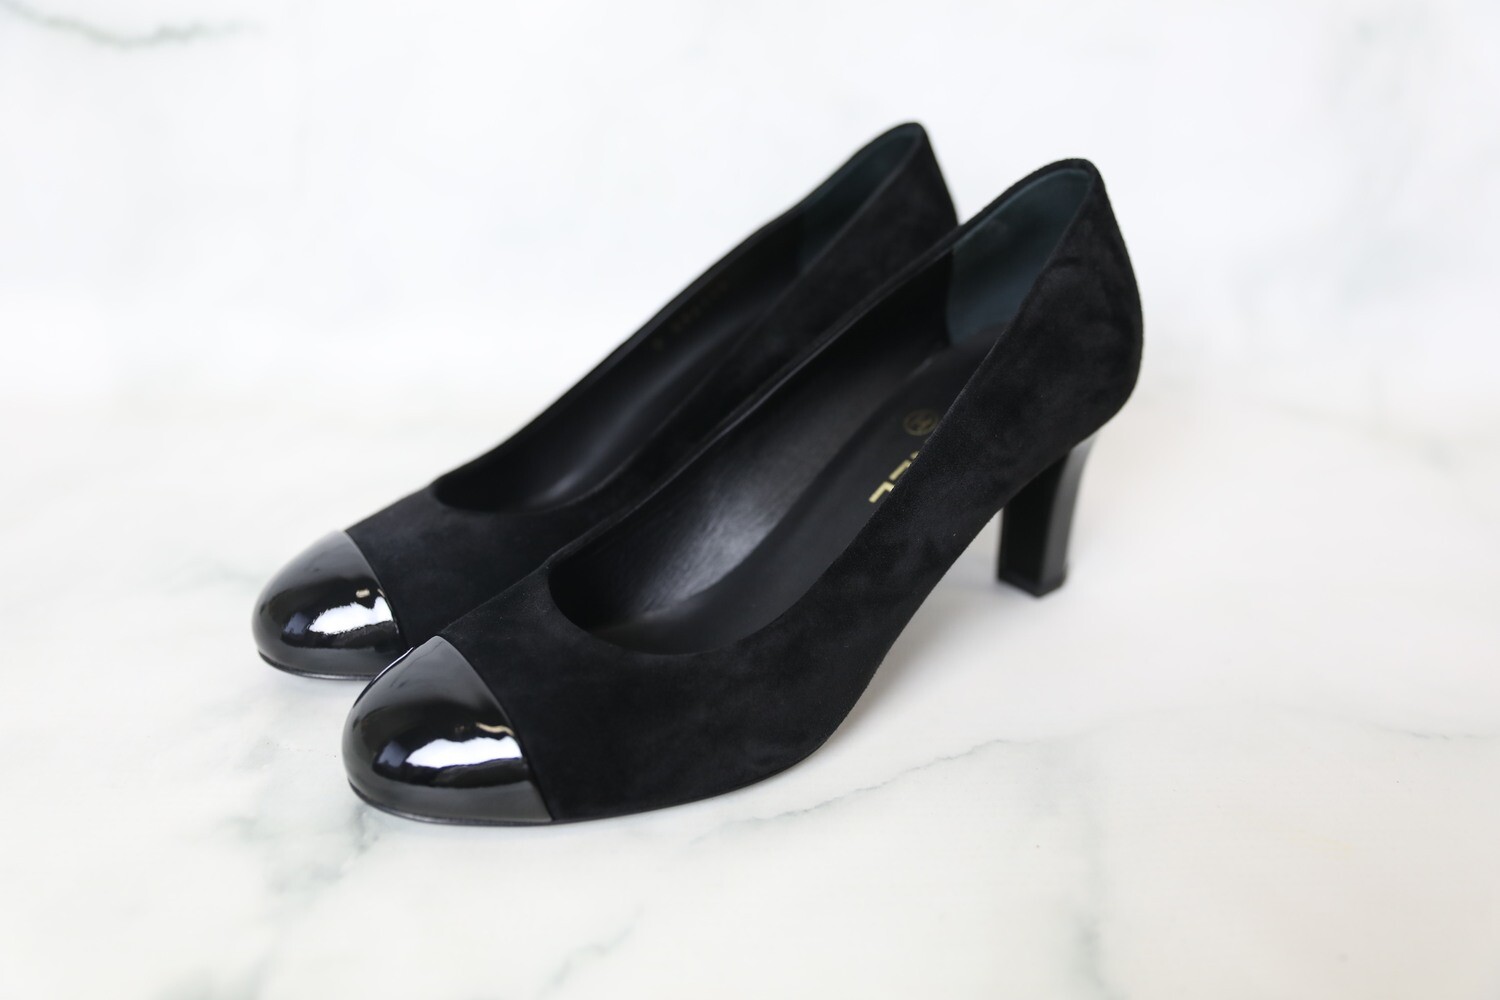 Chanel Shoes Pumps, Black Suede with Patent, Size 39, New in Box WA001